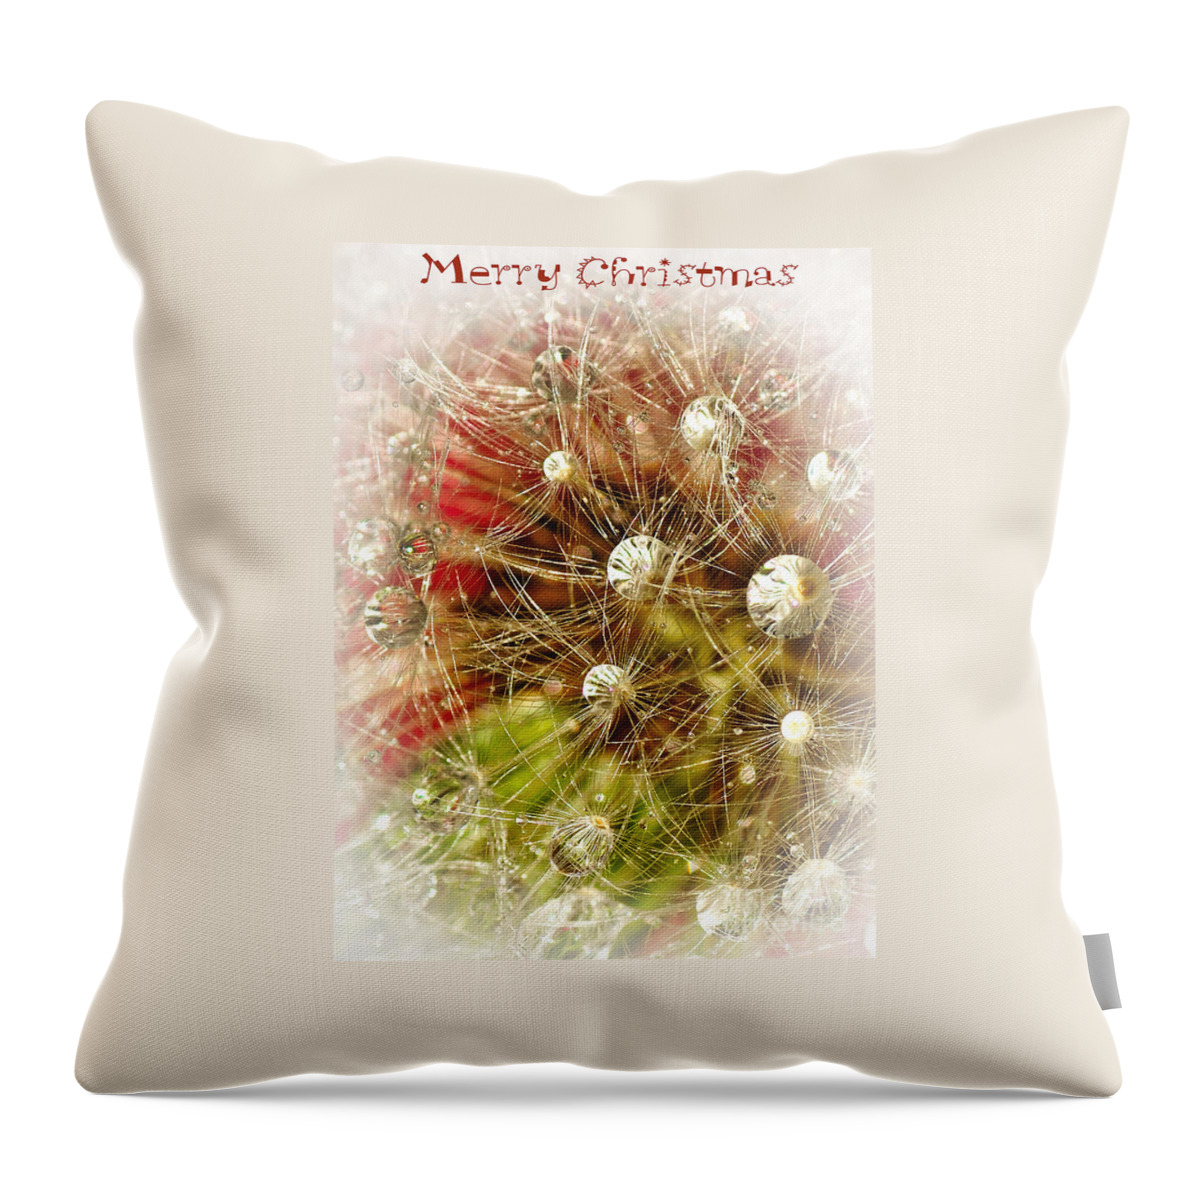 Photography Throw Pillow featuring the photograph Merry Christmas by Kaye Menner